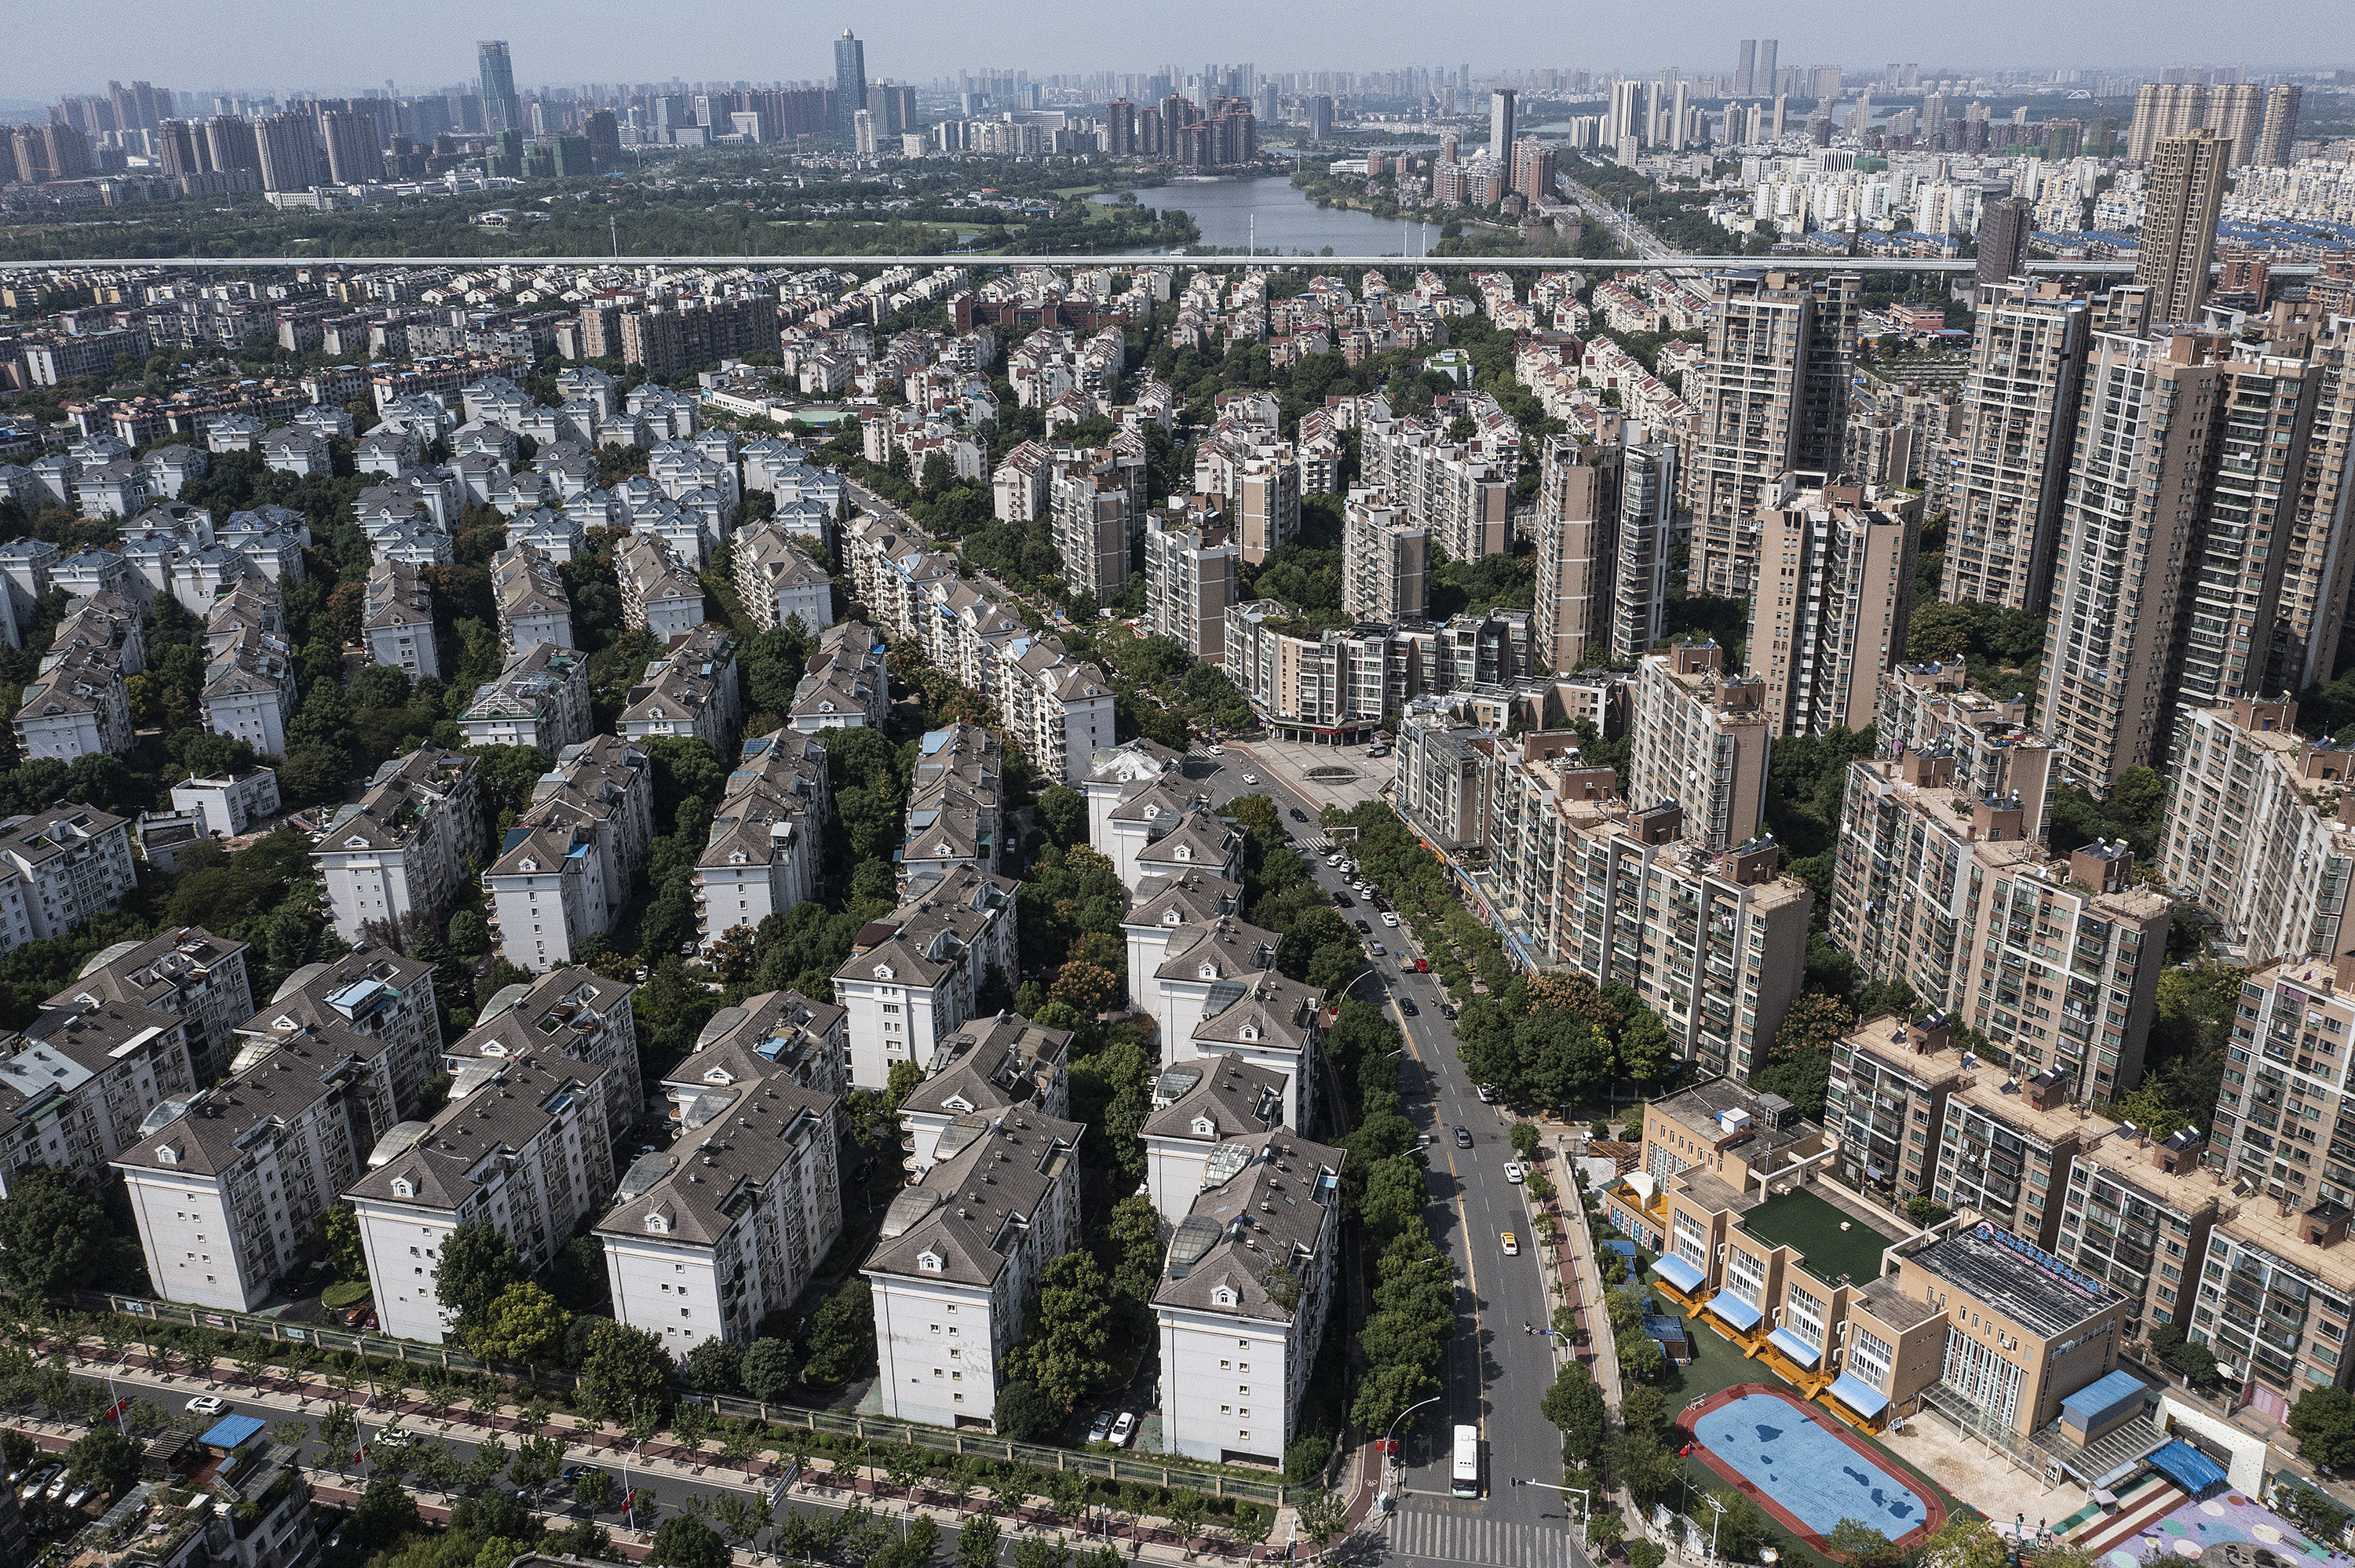 The Evergrande Changqing community, in Wuhan, Hubei province. Photo: Getty Images